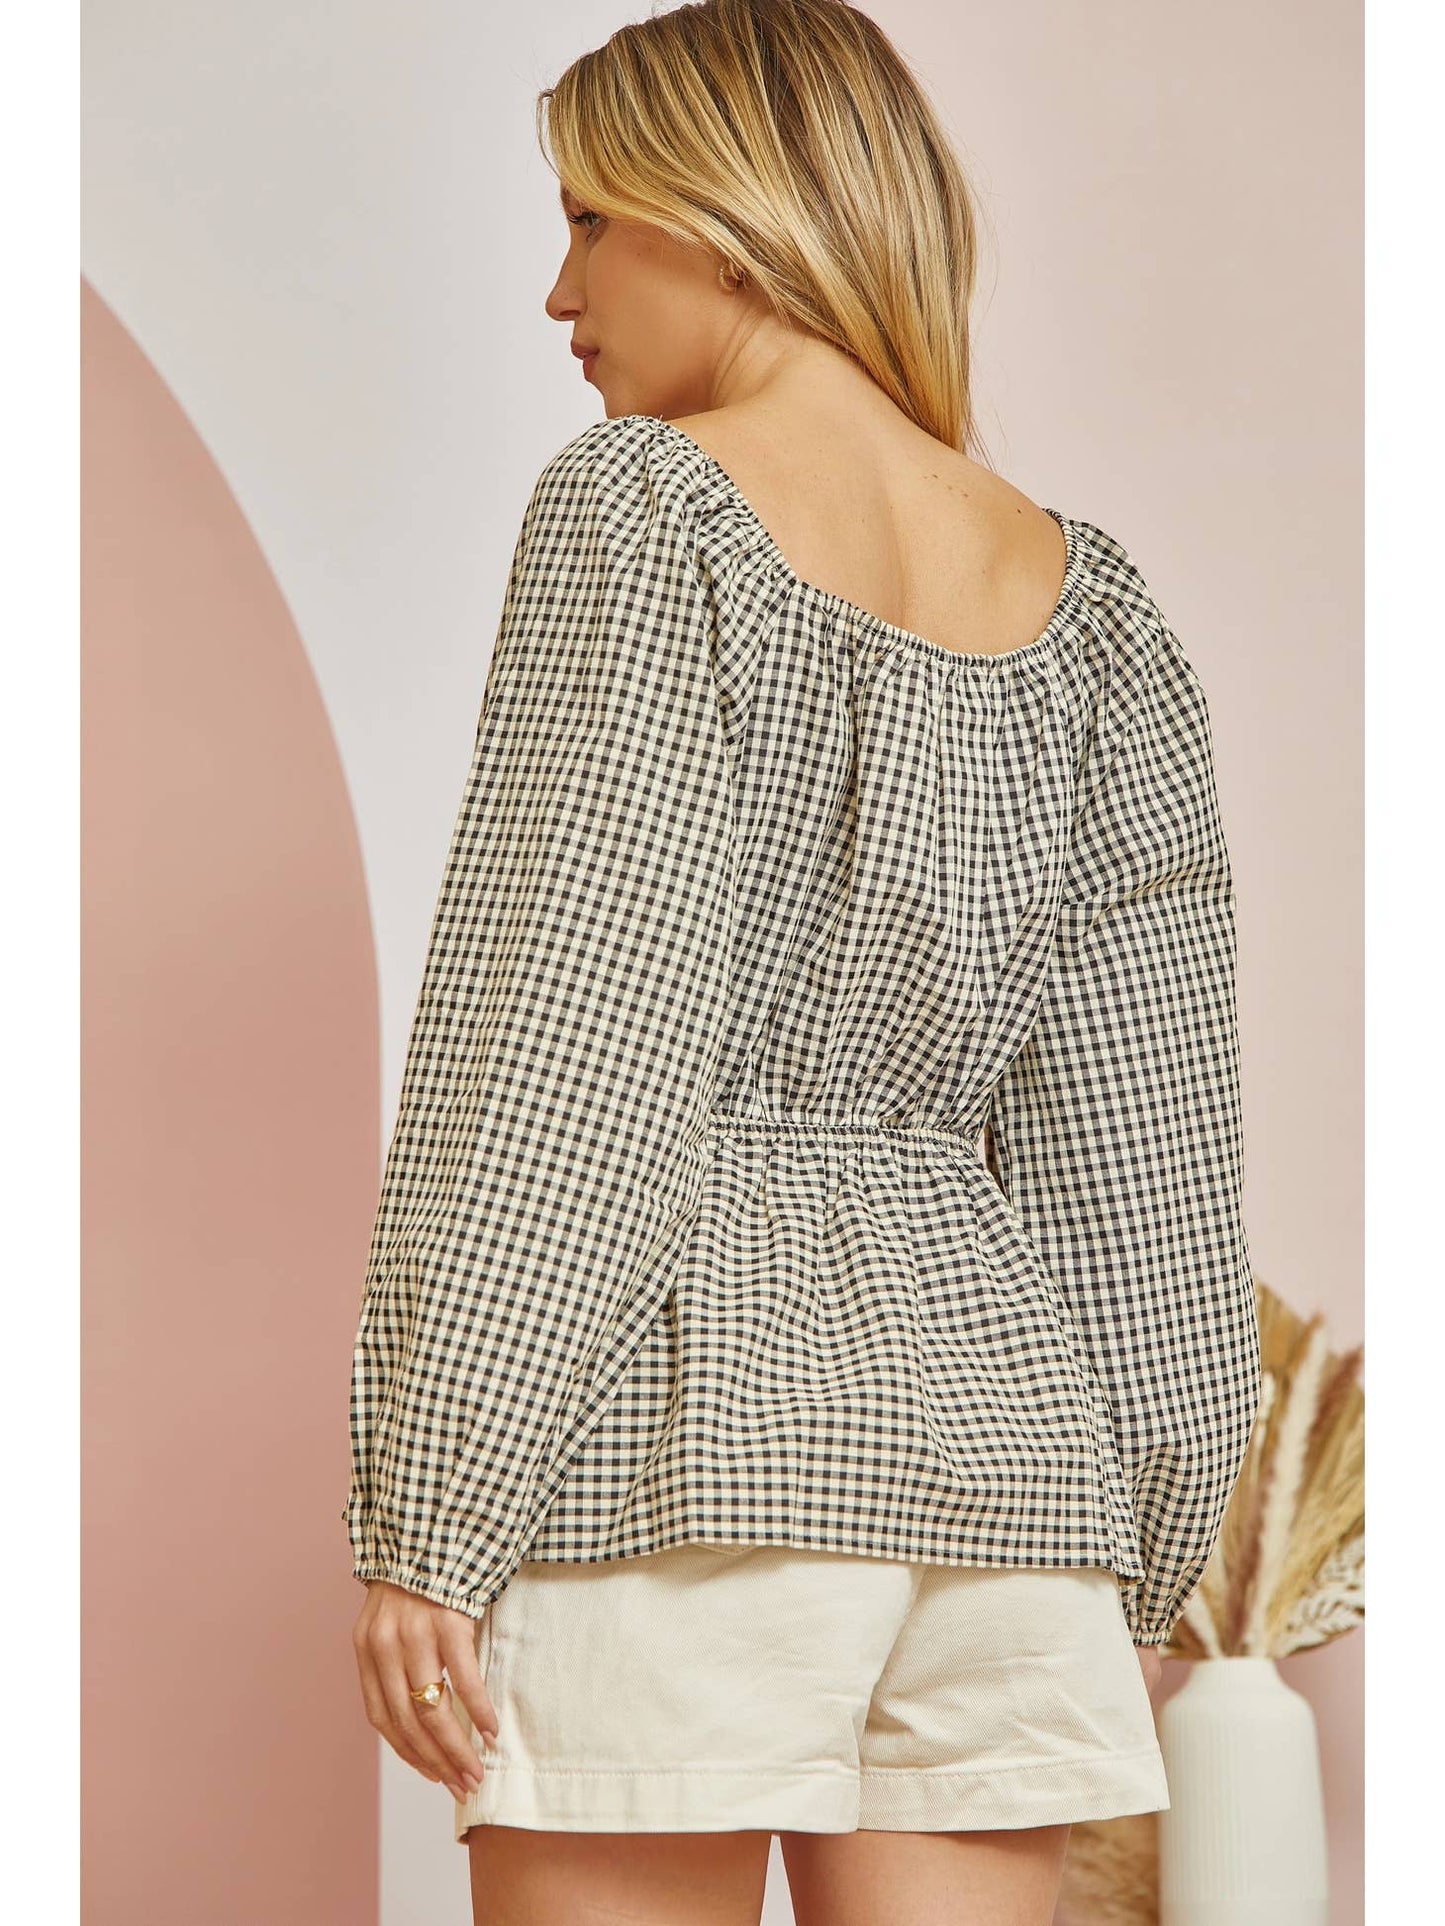 Woven Gingham Top